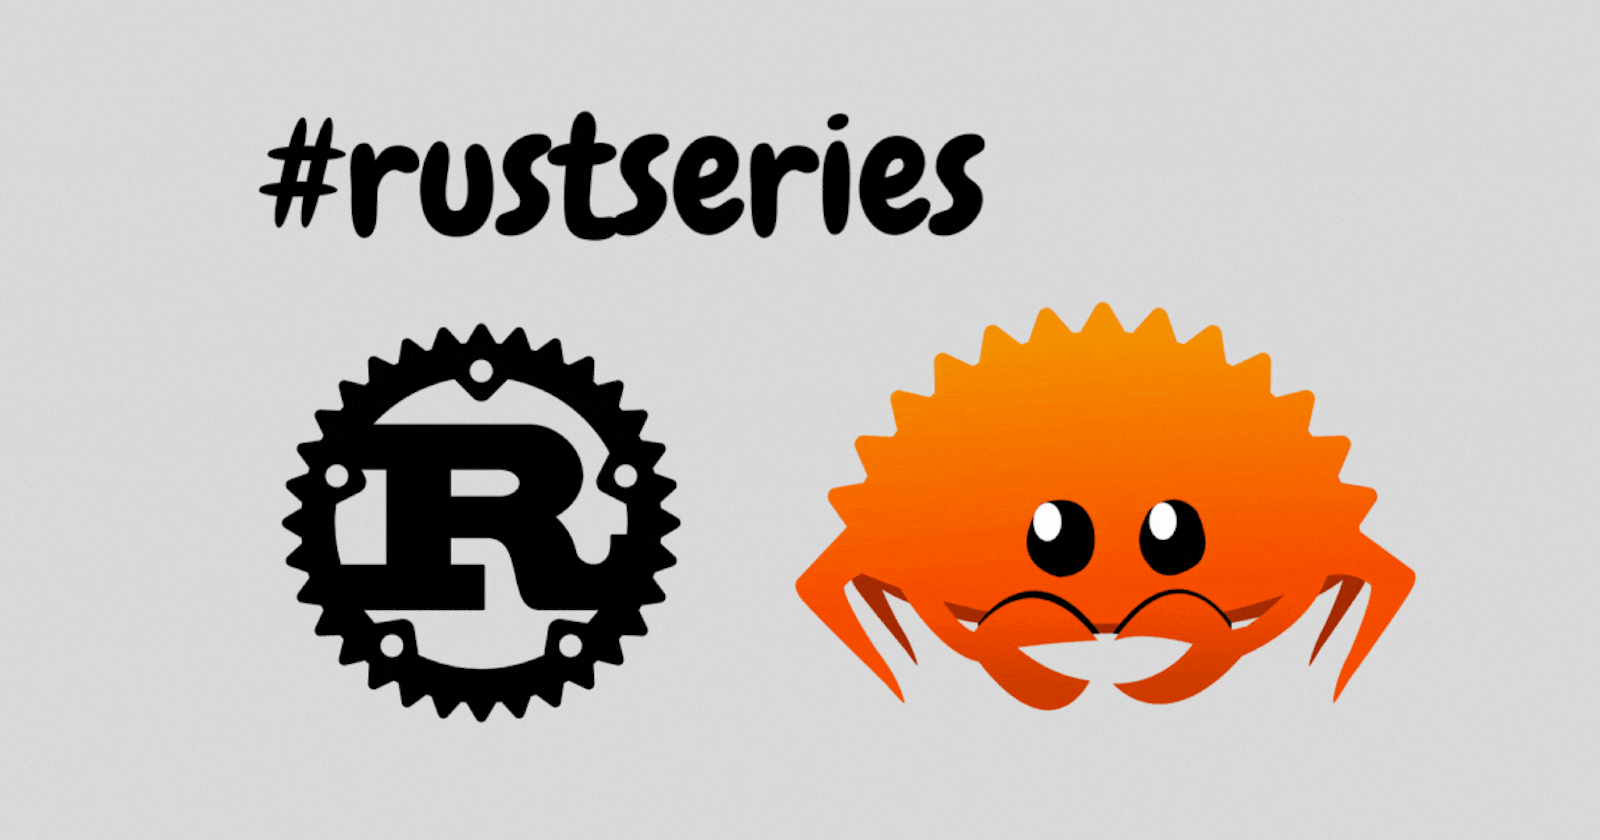 Getting started with Rust development